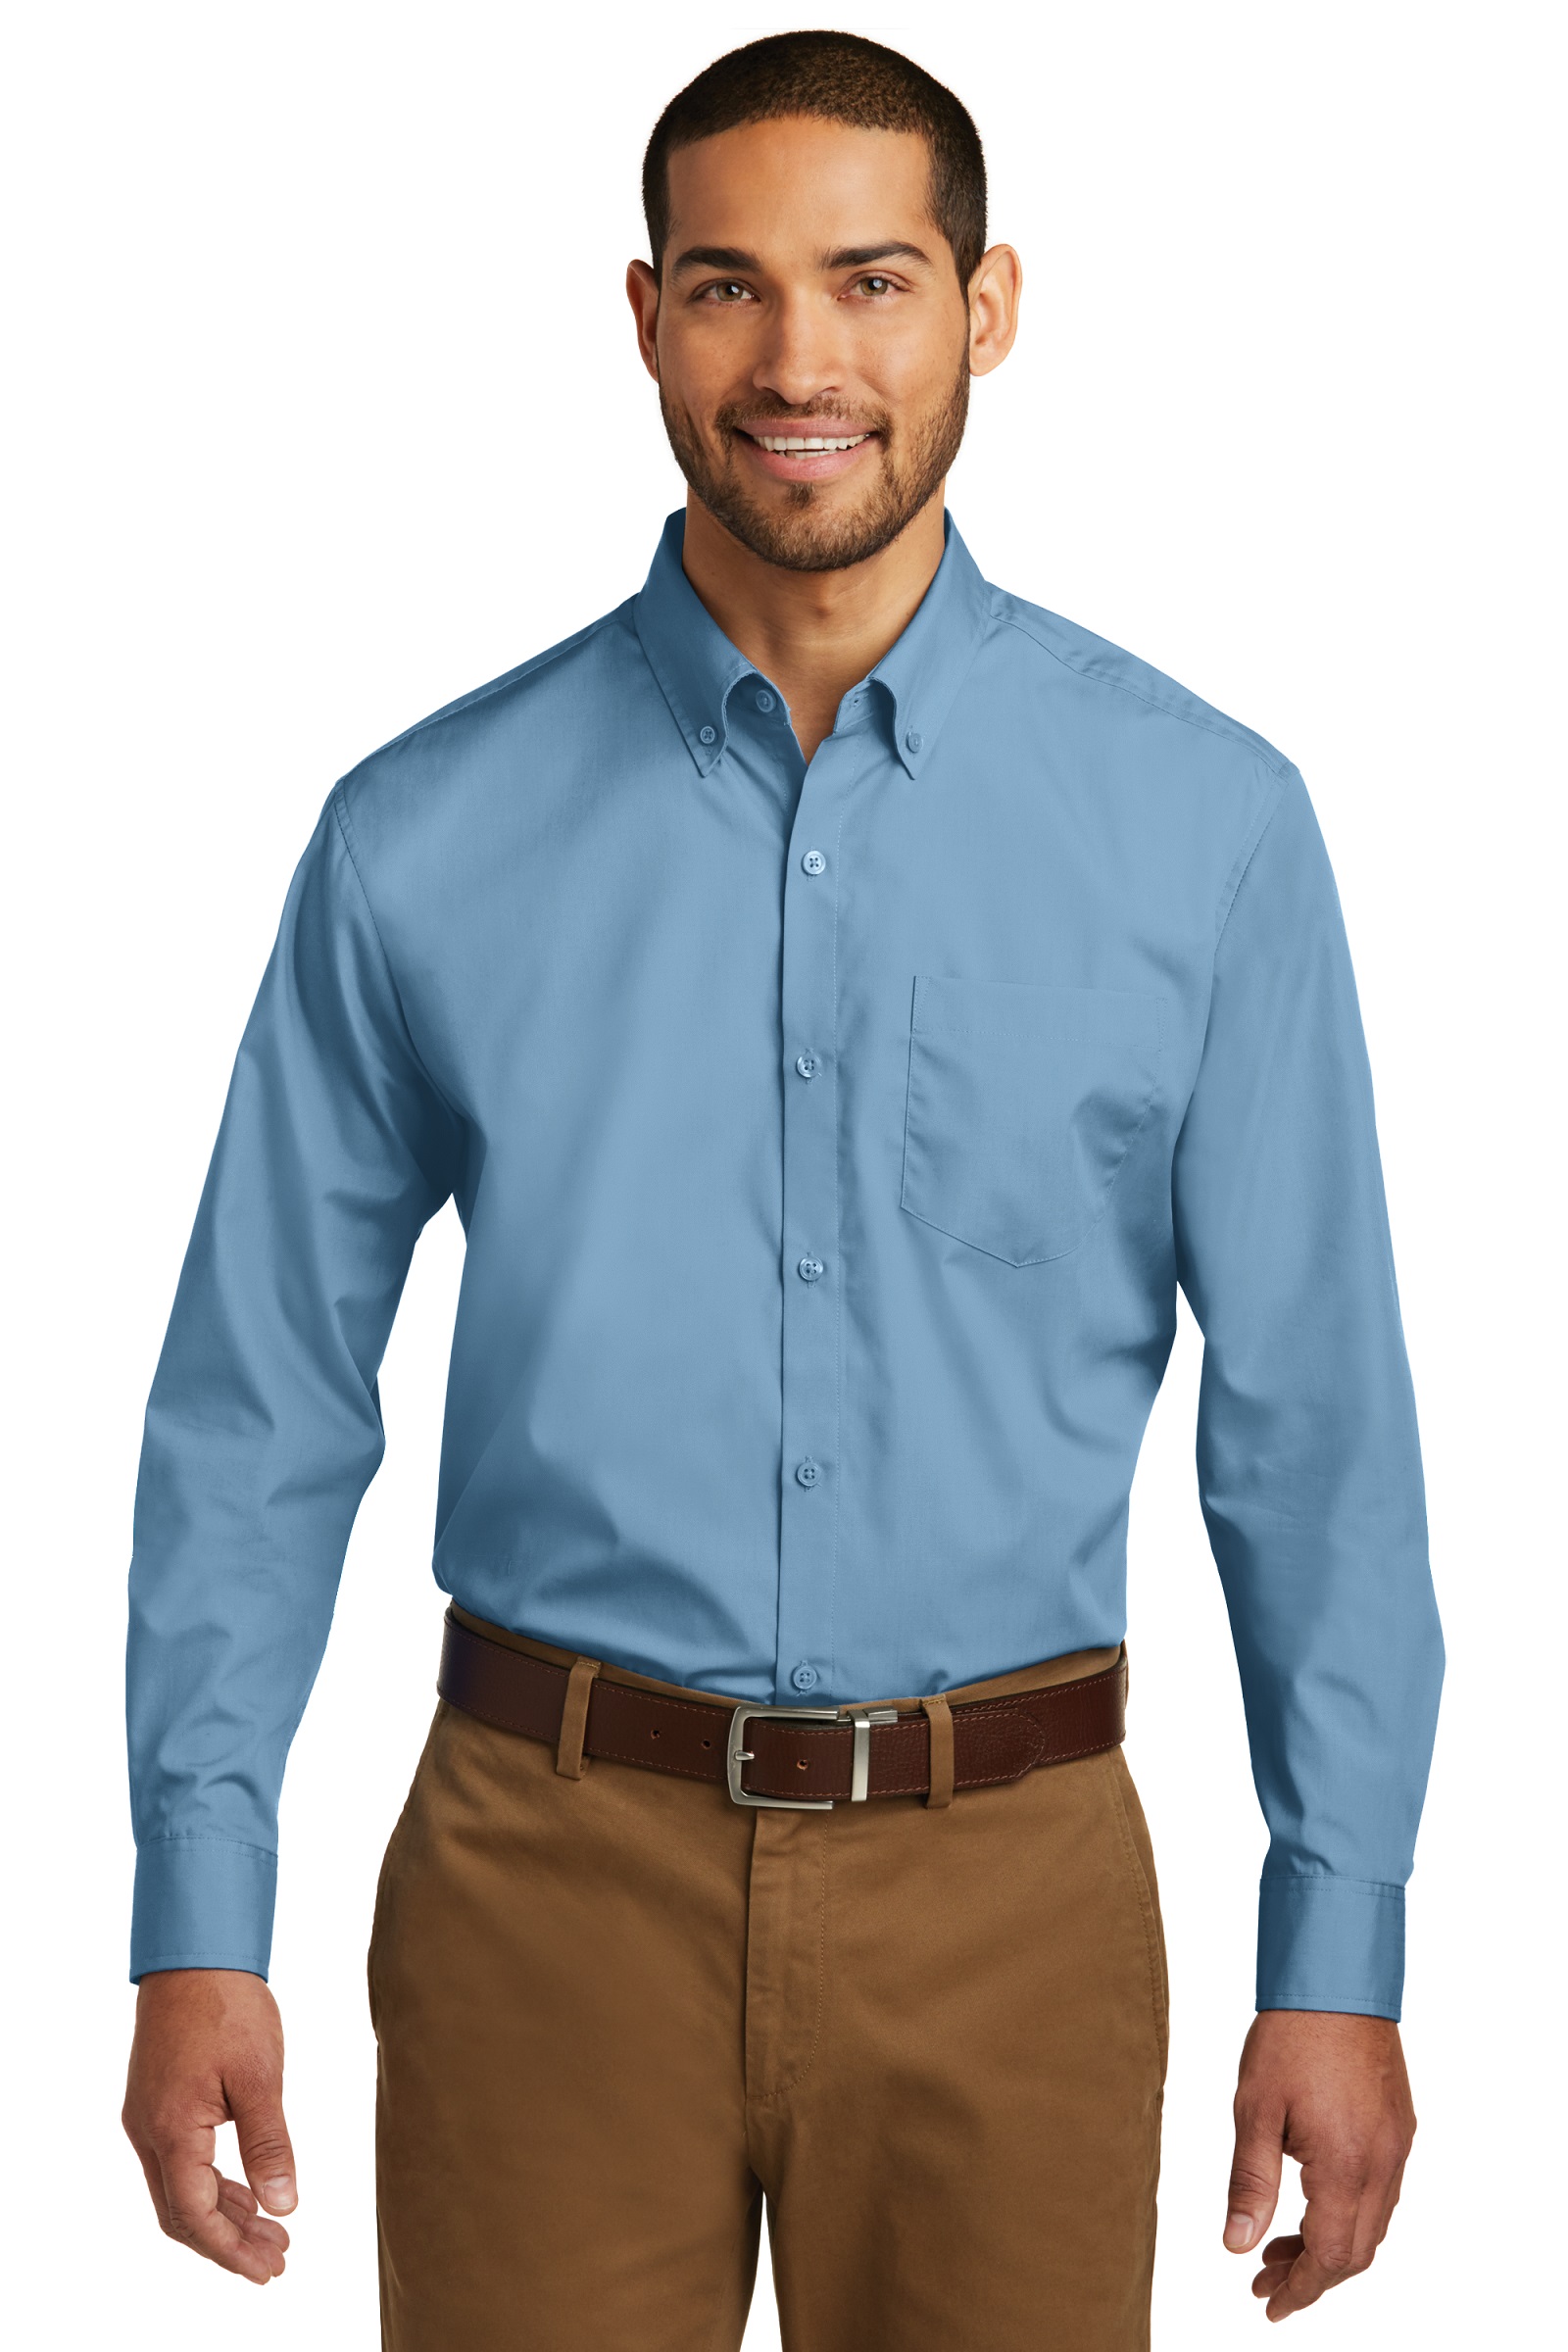 Port Authority Embroidered Men's Long Sleeve Carefree Poplin Shirt